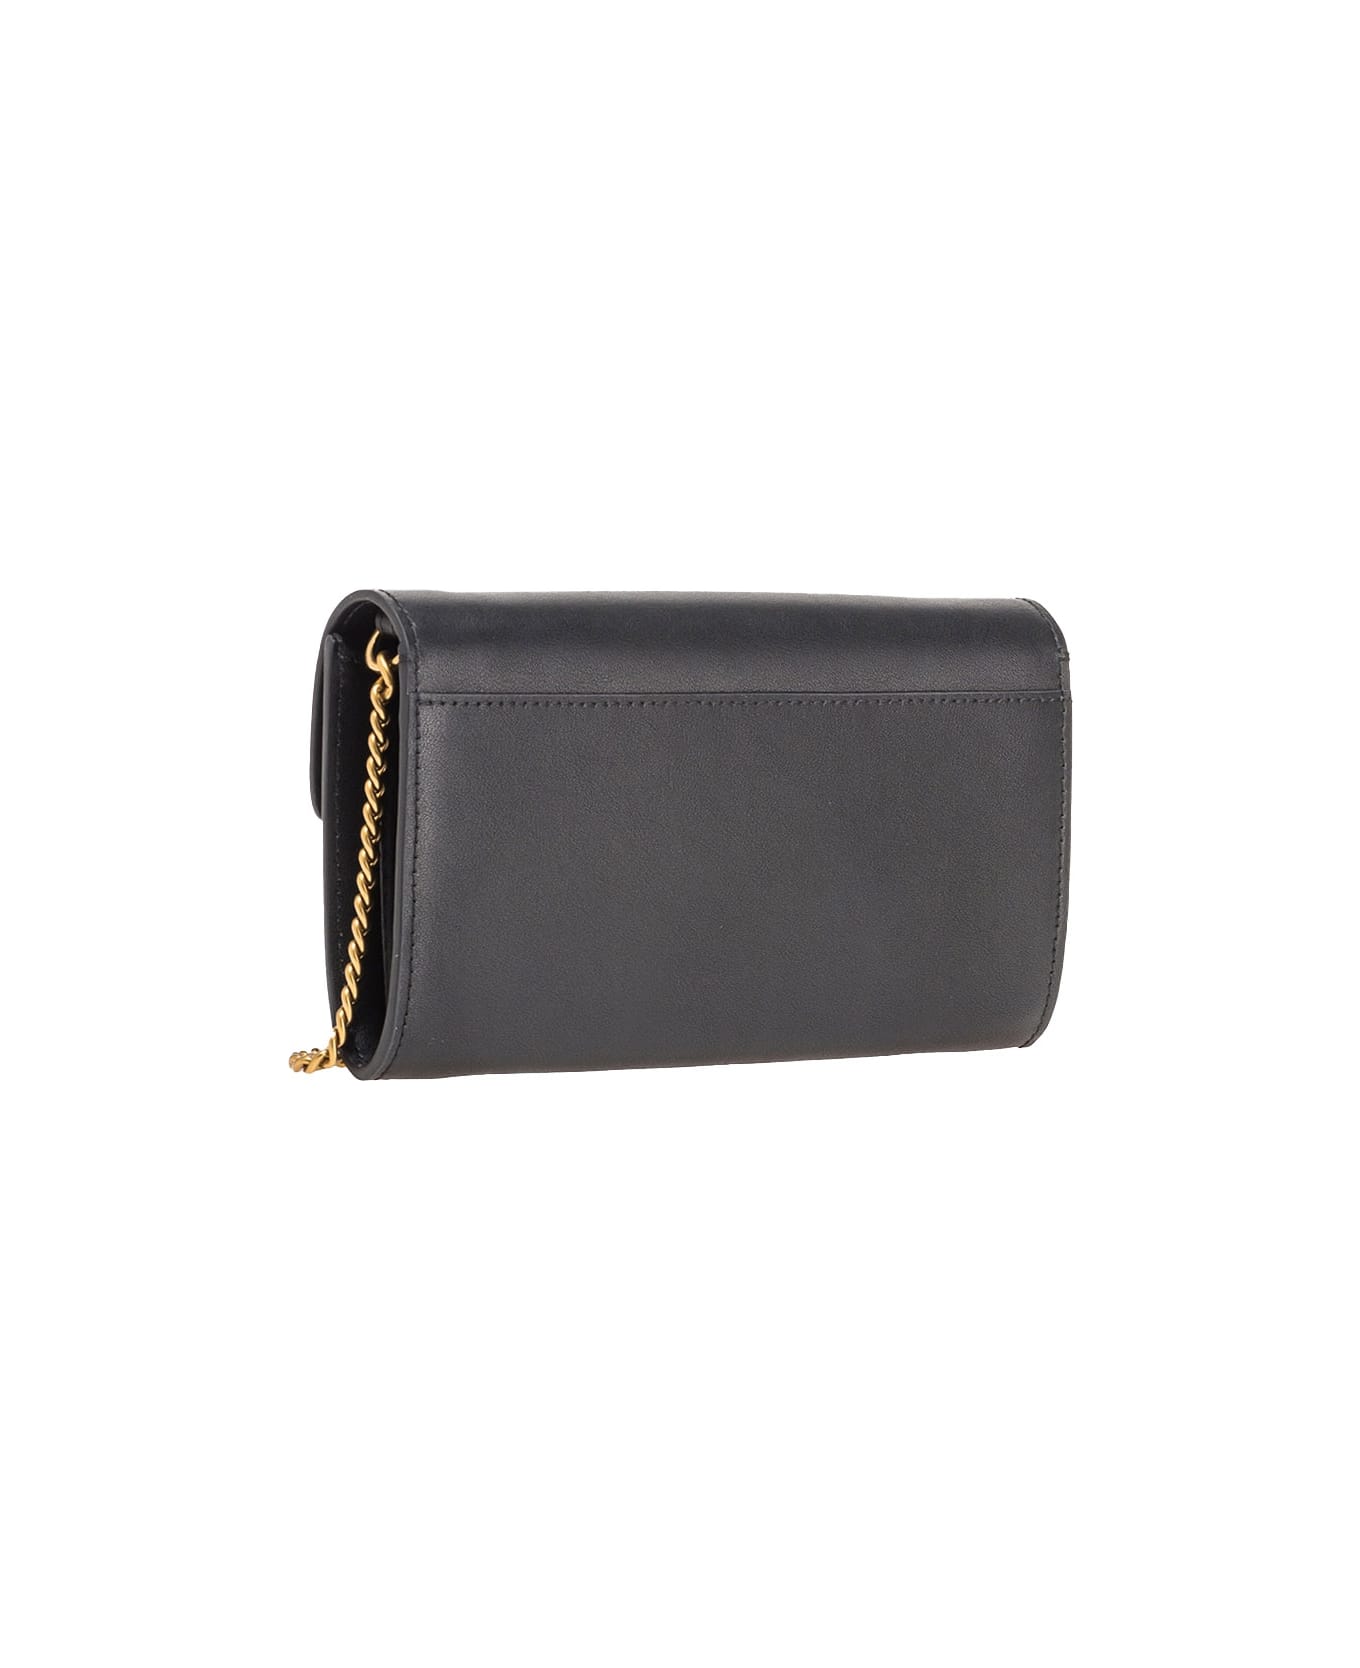 Pinko Love Bag One Simply Wallet